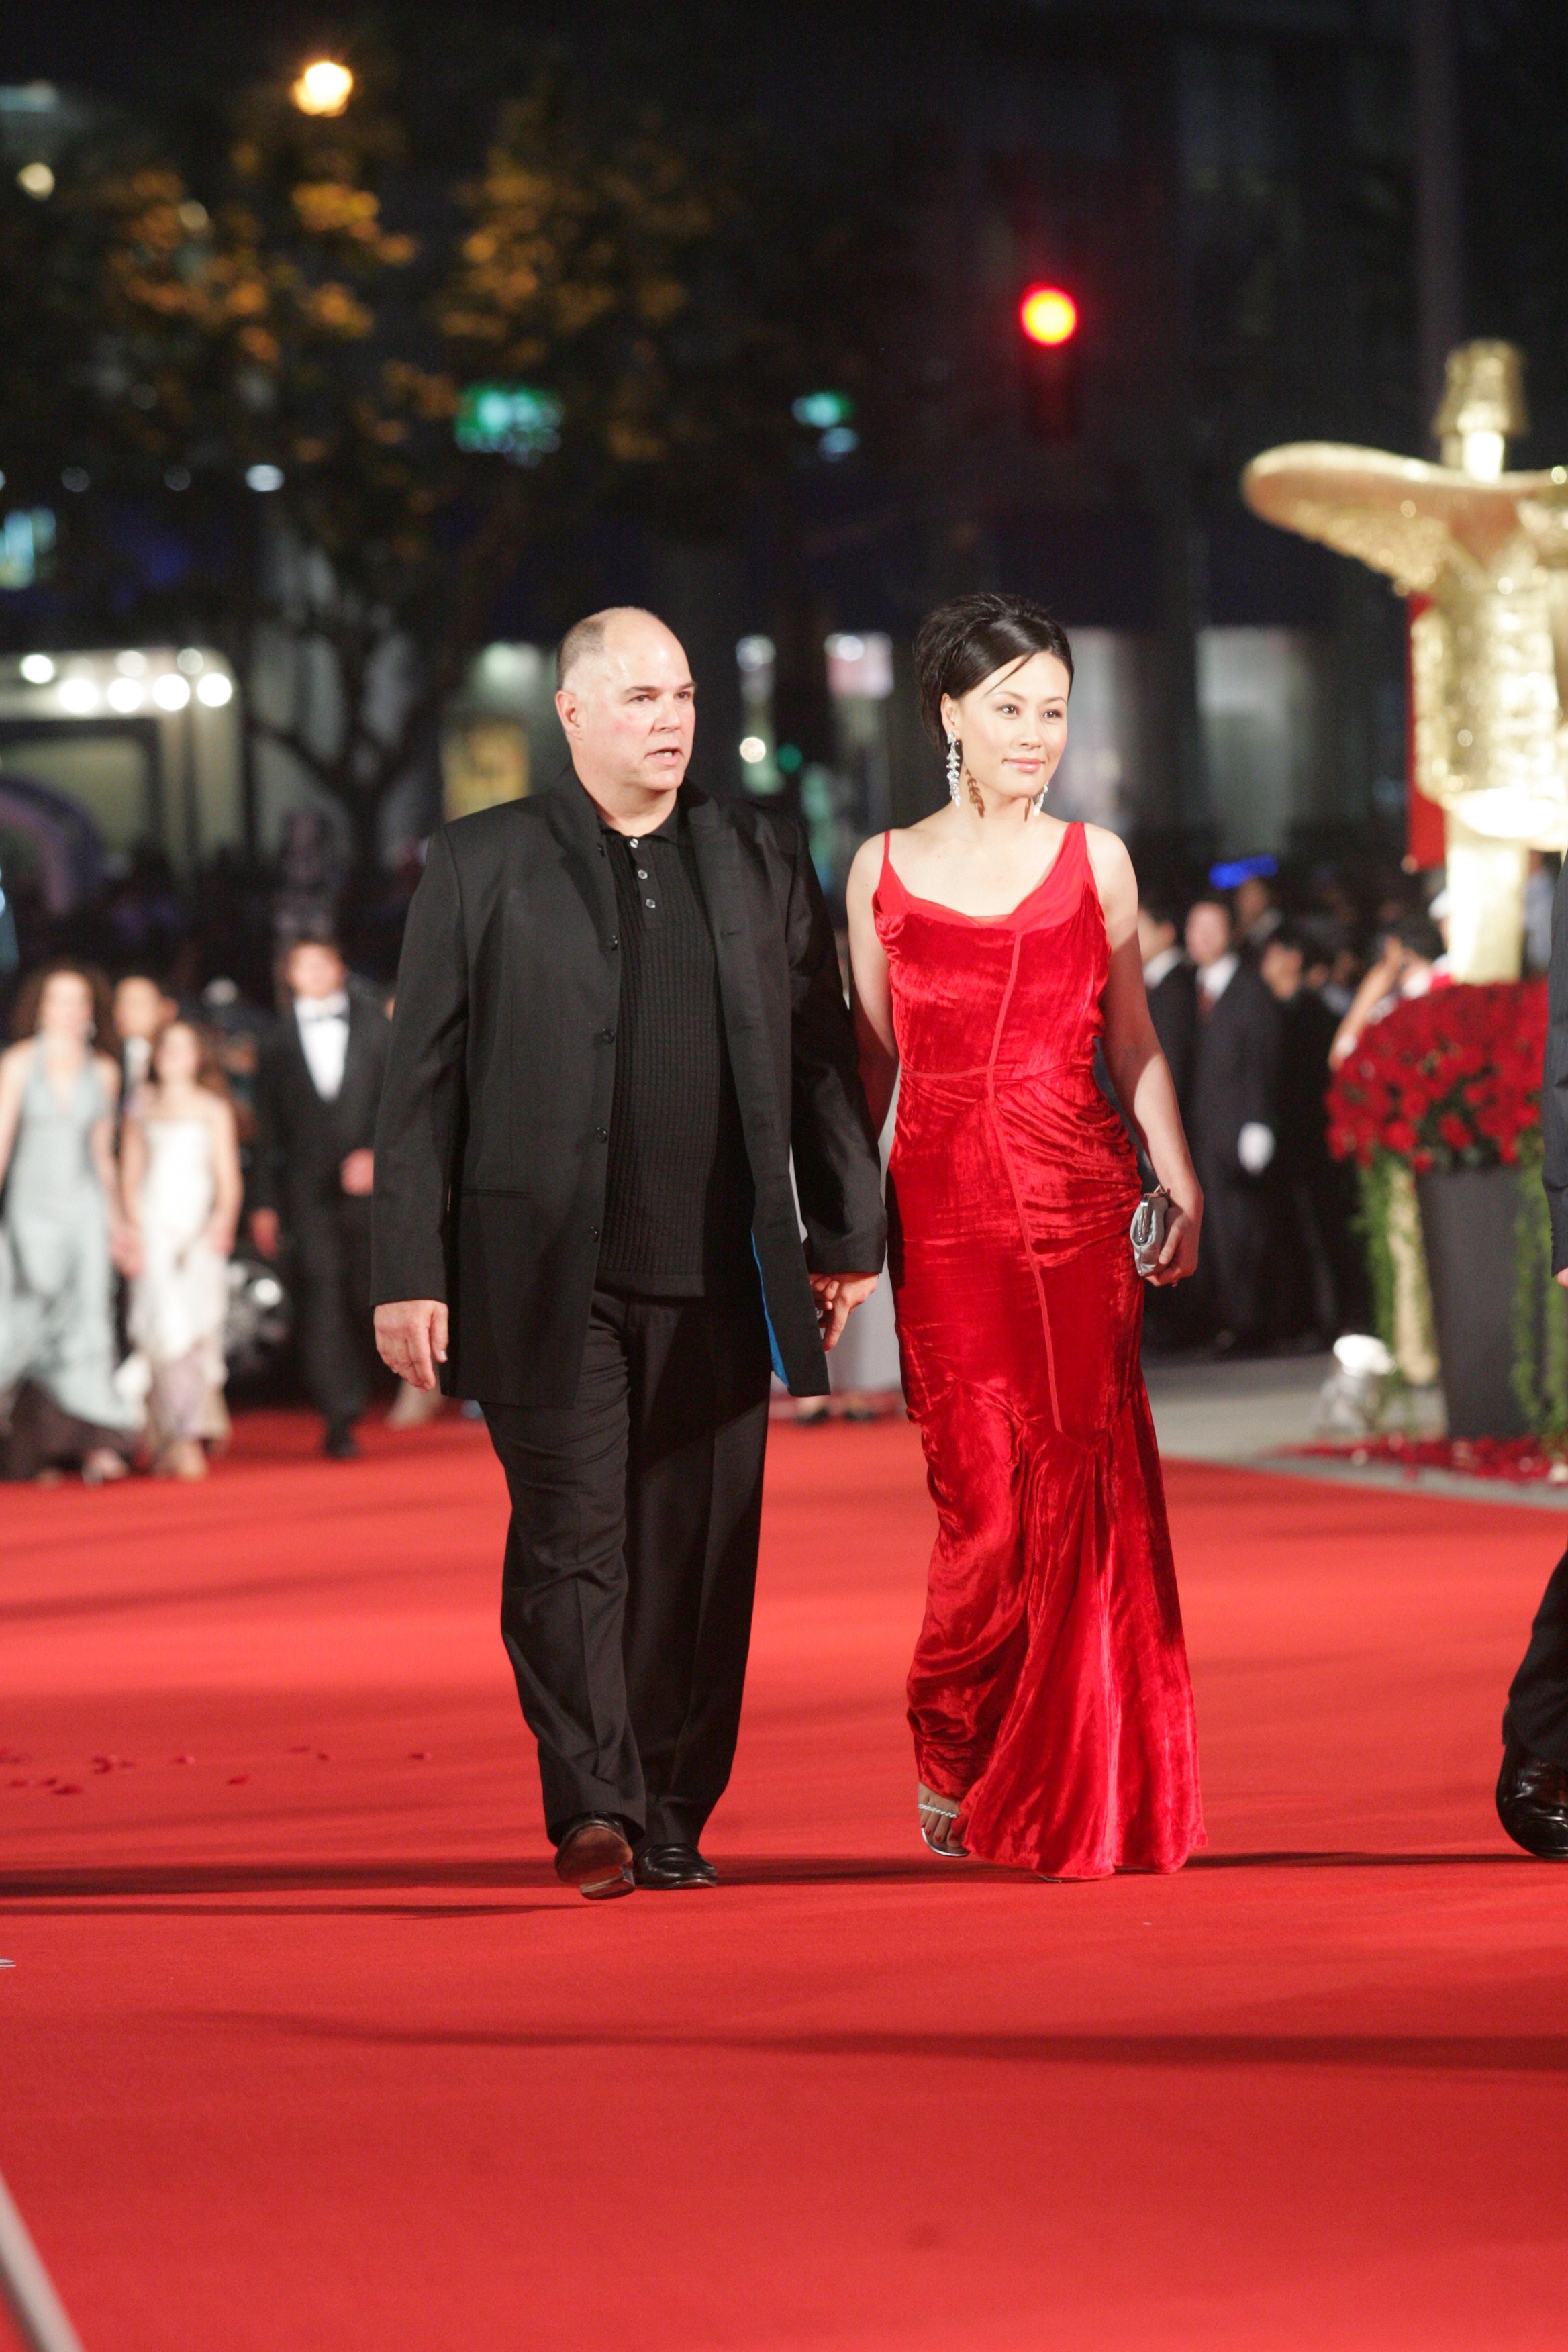 Vivian Wu and husband, writer/director/producer Oscar Luis Costo, at the 9th Shanghai international film festival opening red carpet.